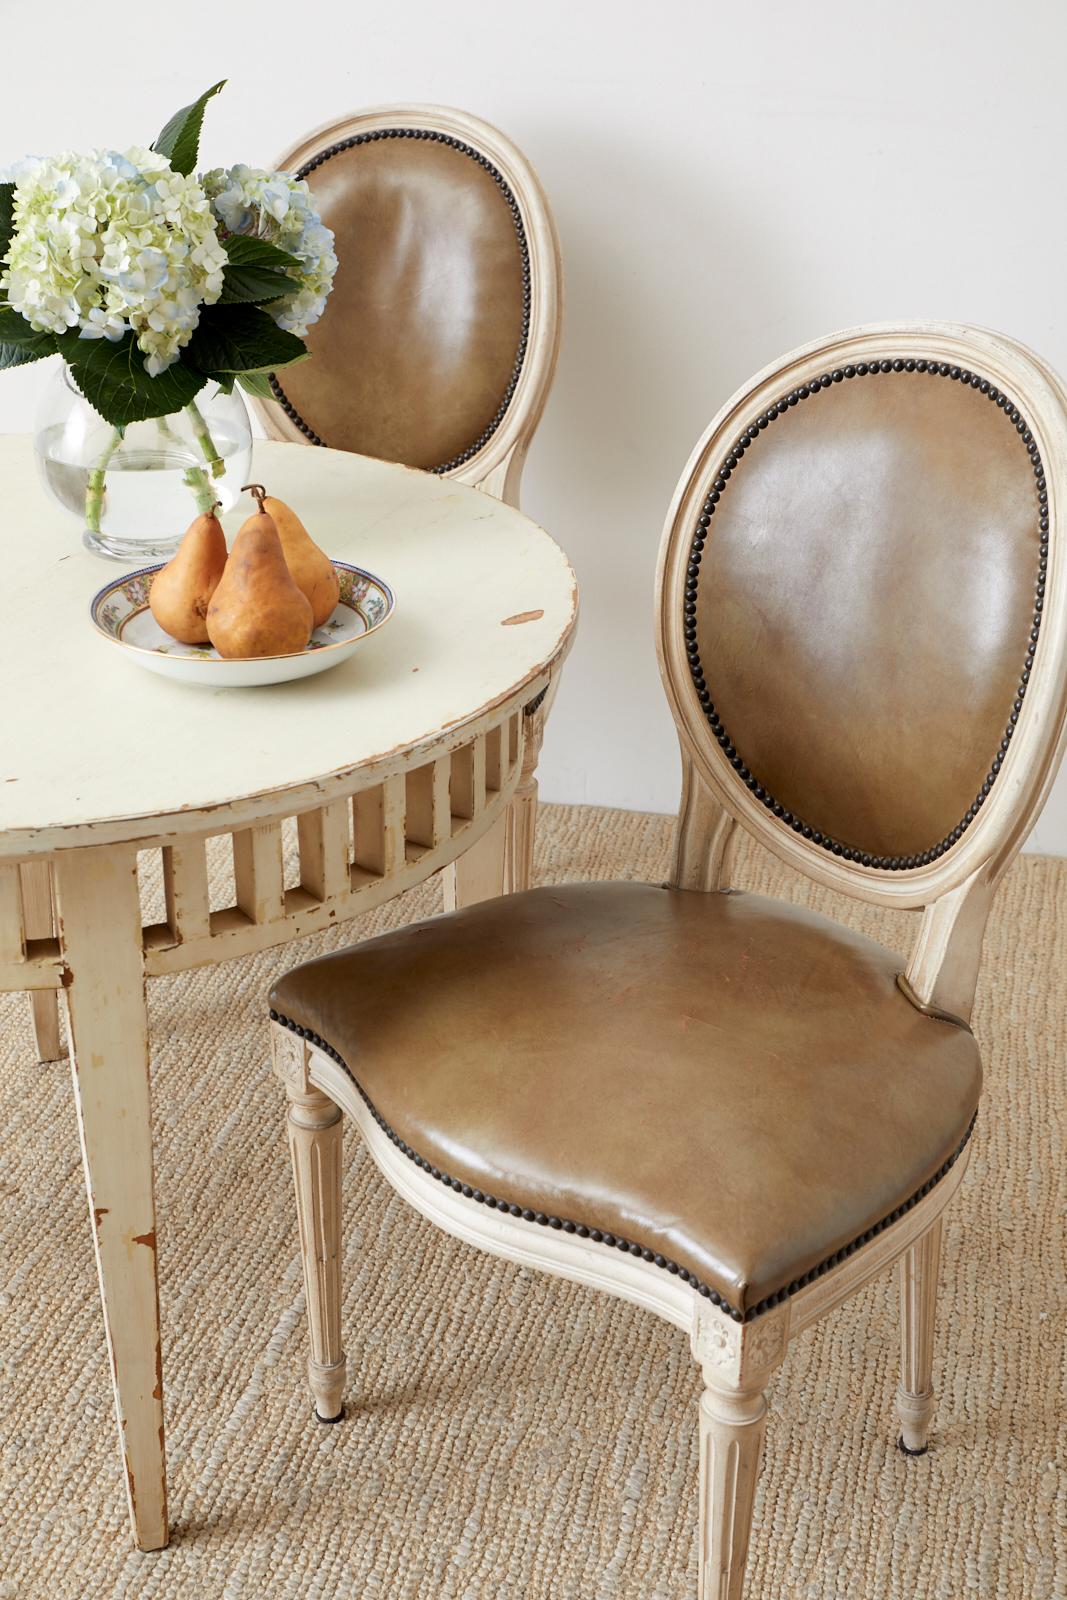 Distinctive set of four Baker furniture dining chairs featuring a painted finish made in the French Louis XVI taste with original leather seats in Baker's satinwood color. The upholstery is bordered with patinated brass tack nail heads to contrast